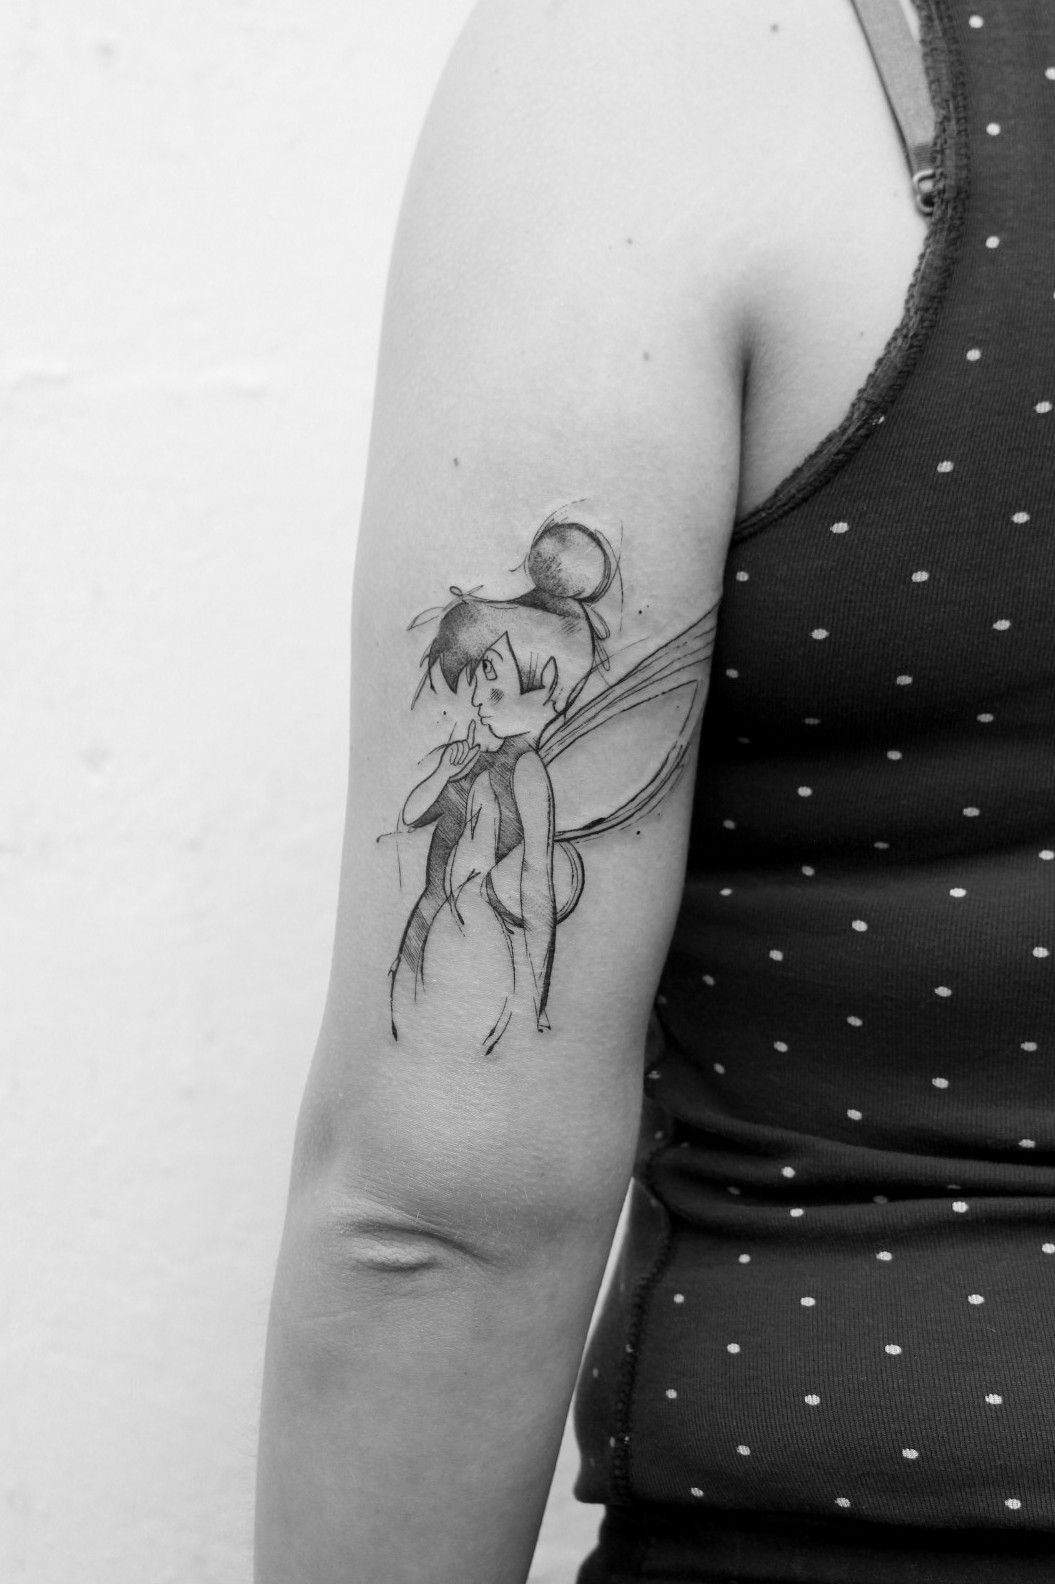 101 Amazing Tinkerbell Tattoo Designs You Need To See! | Tattoo designs,  Tattoos, Tinker bell tattoo